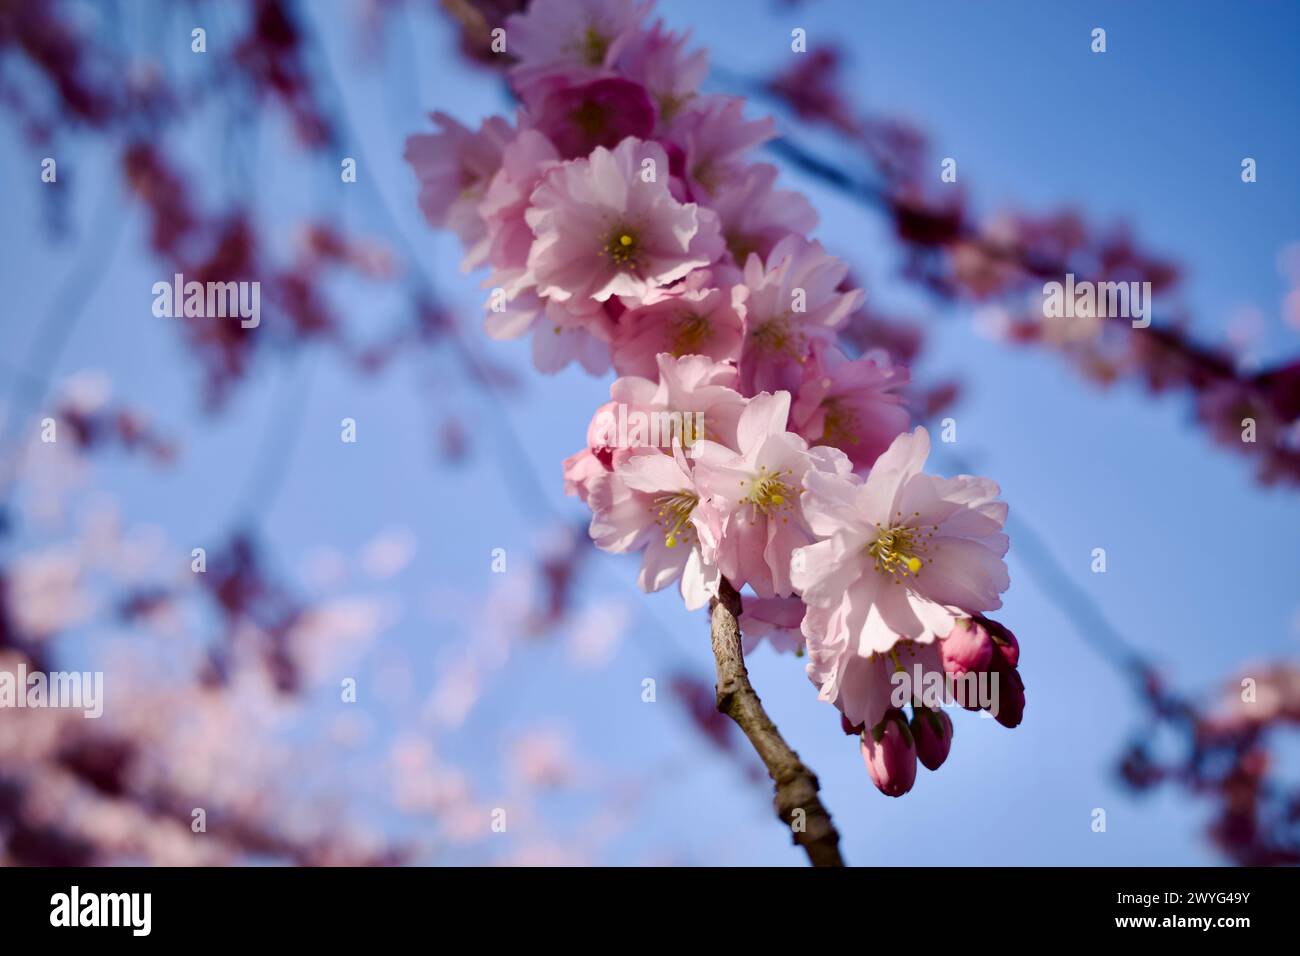 Cherry blossom in a park. The pink flowers are stunning under blue sky. Stock Photo